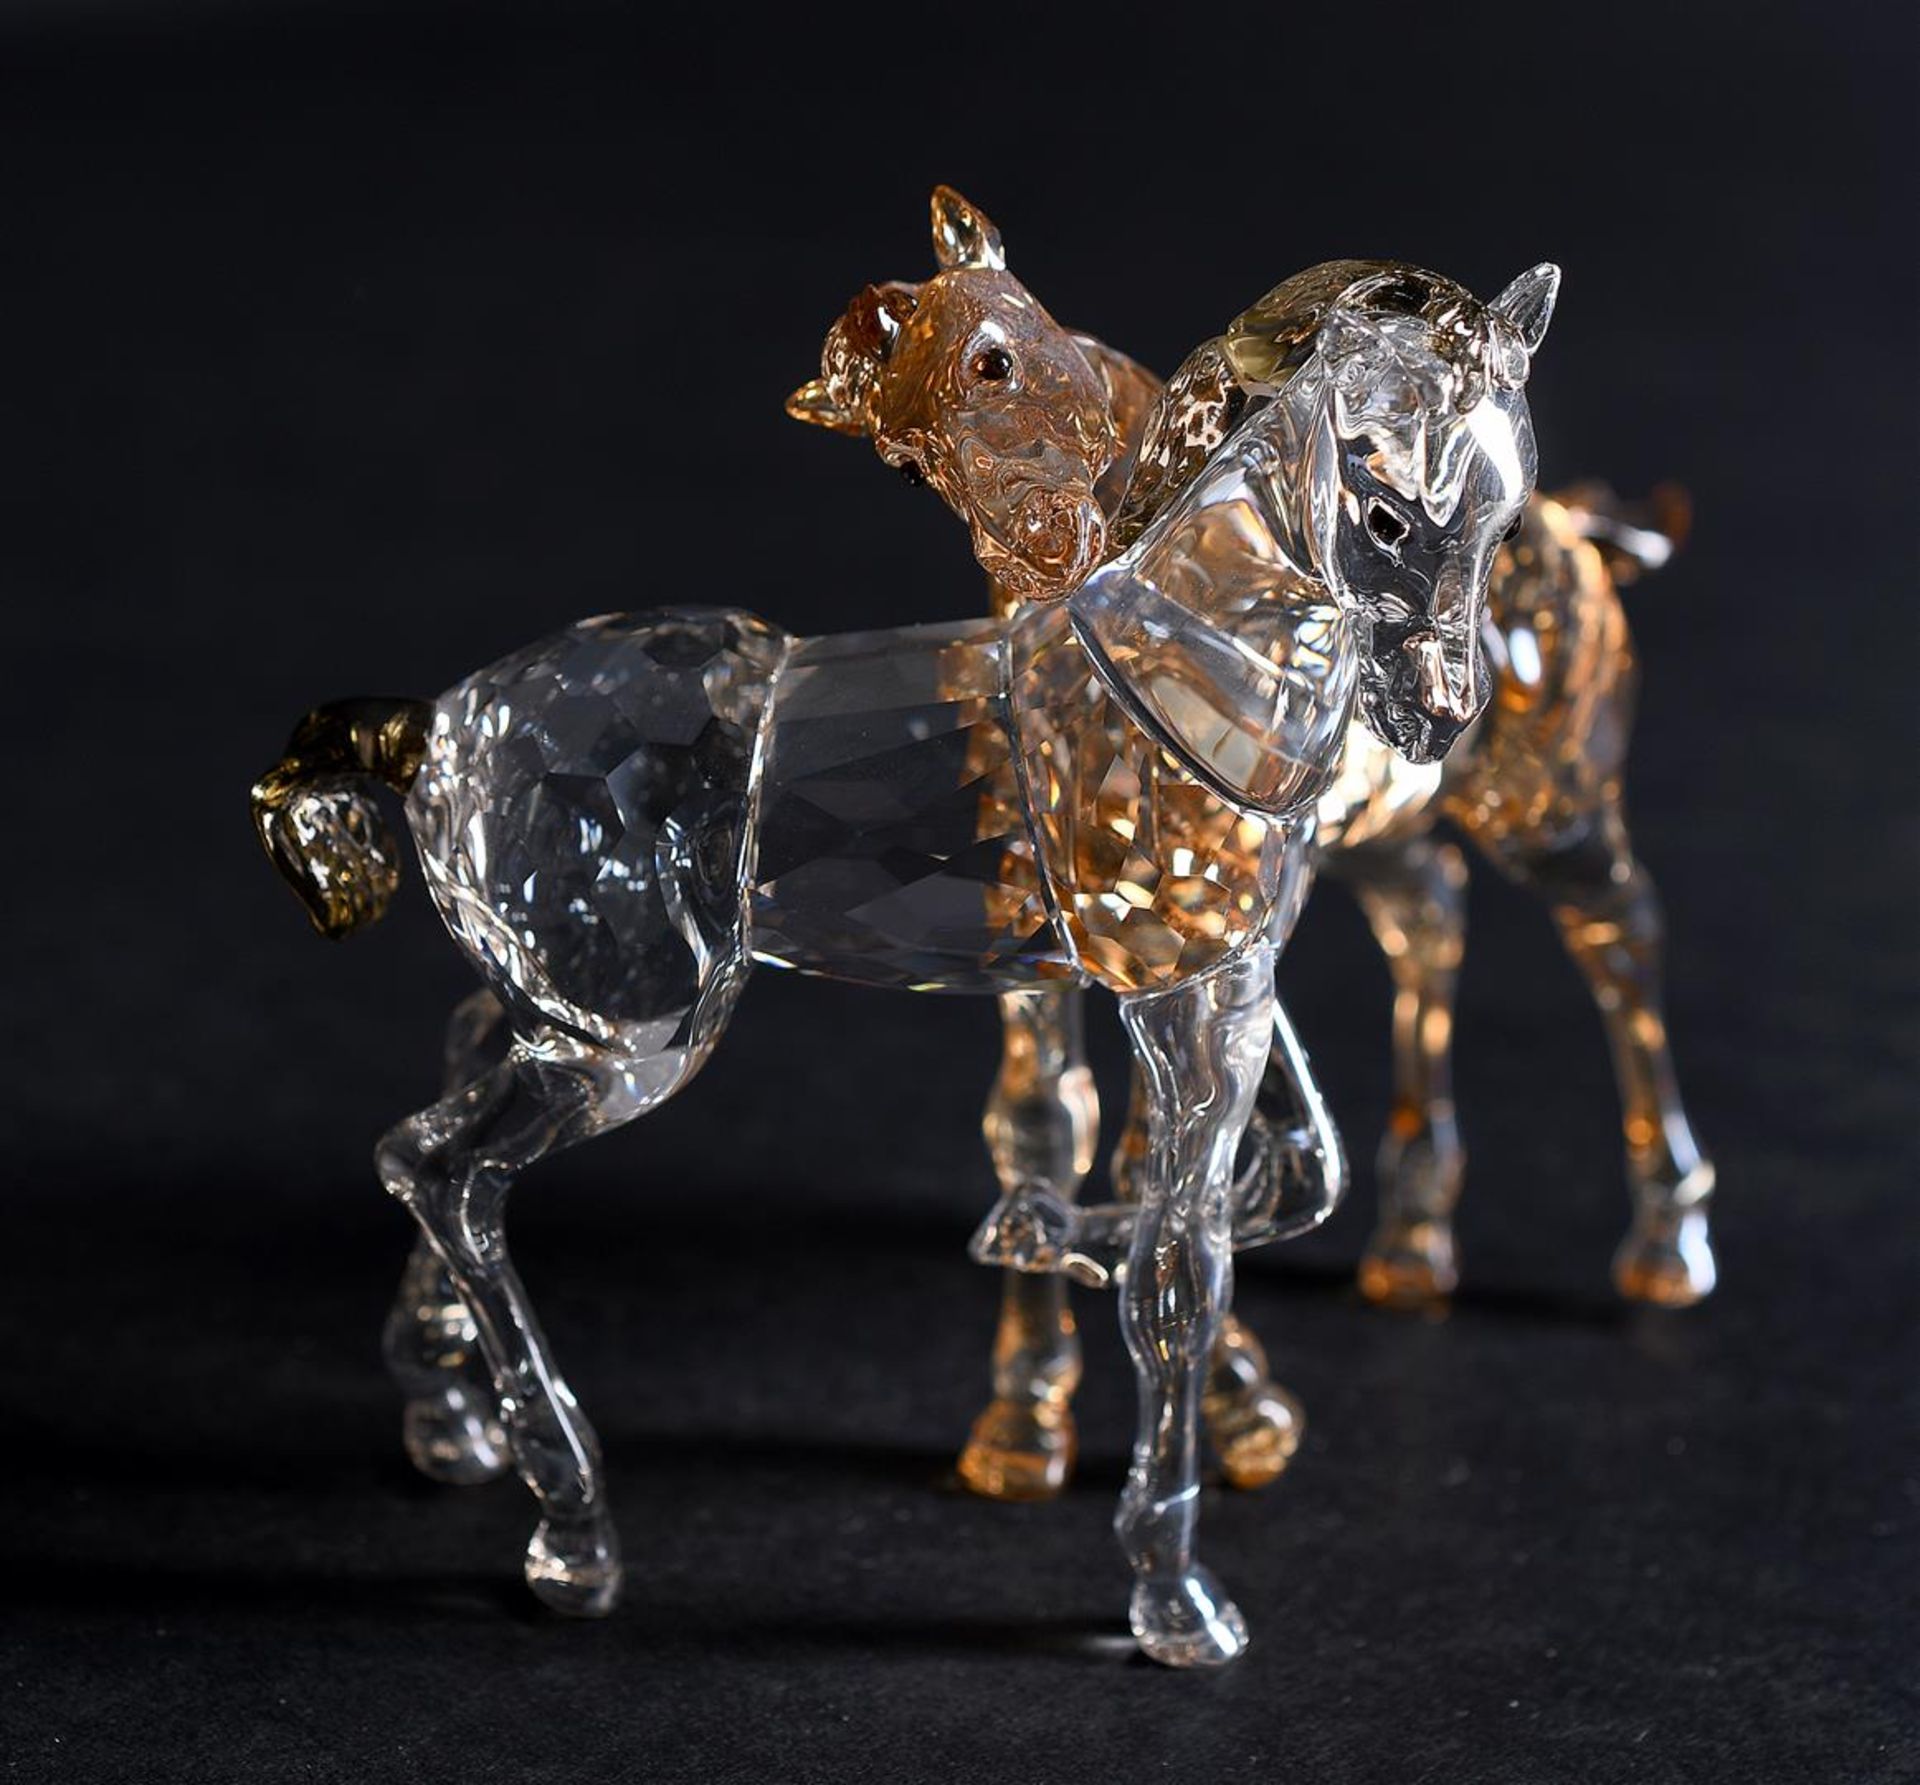 Swarovski, Foals, Year of issue 2012,1121627. Includes original box.
11,9 x 9,2 cm. - Image 3 of 8